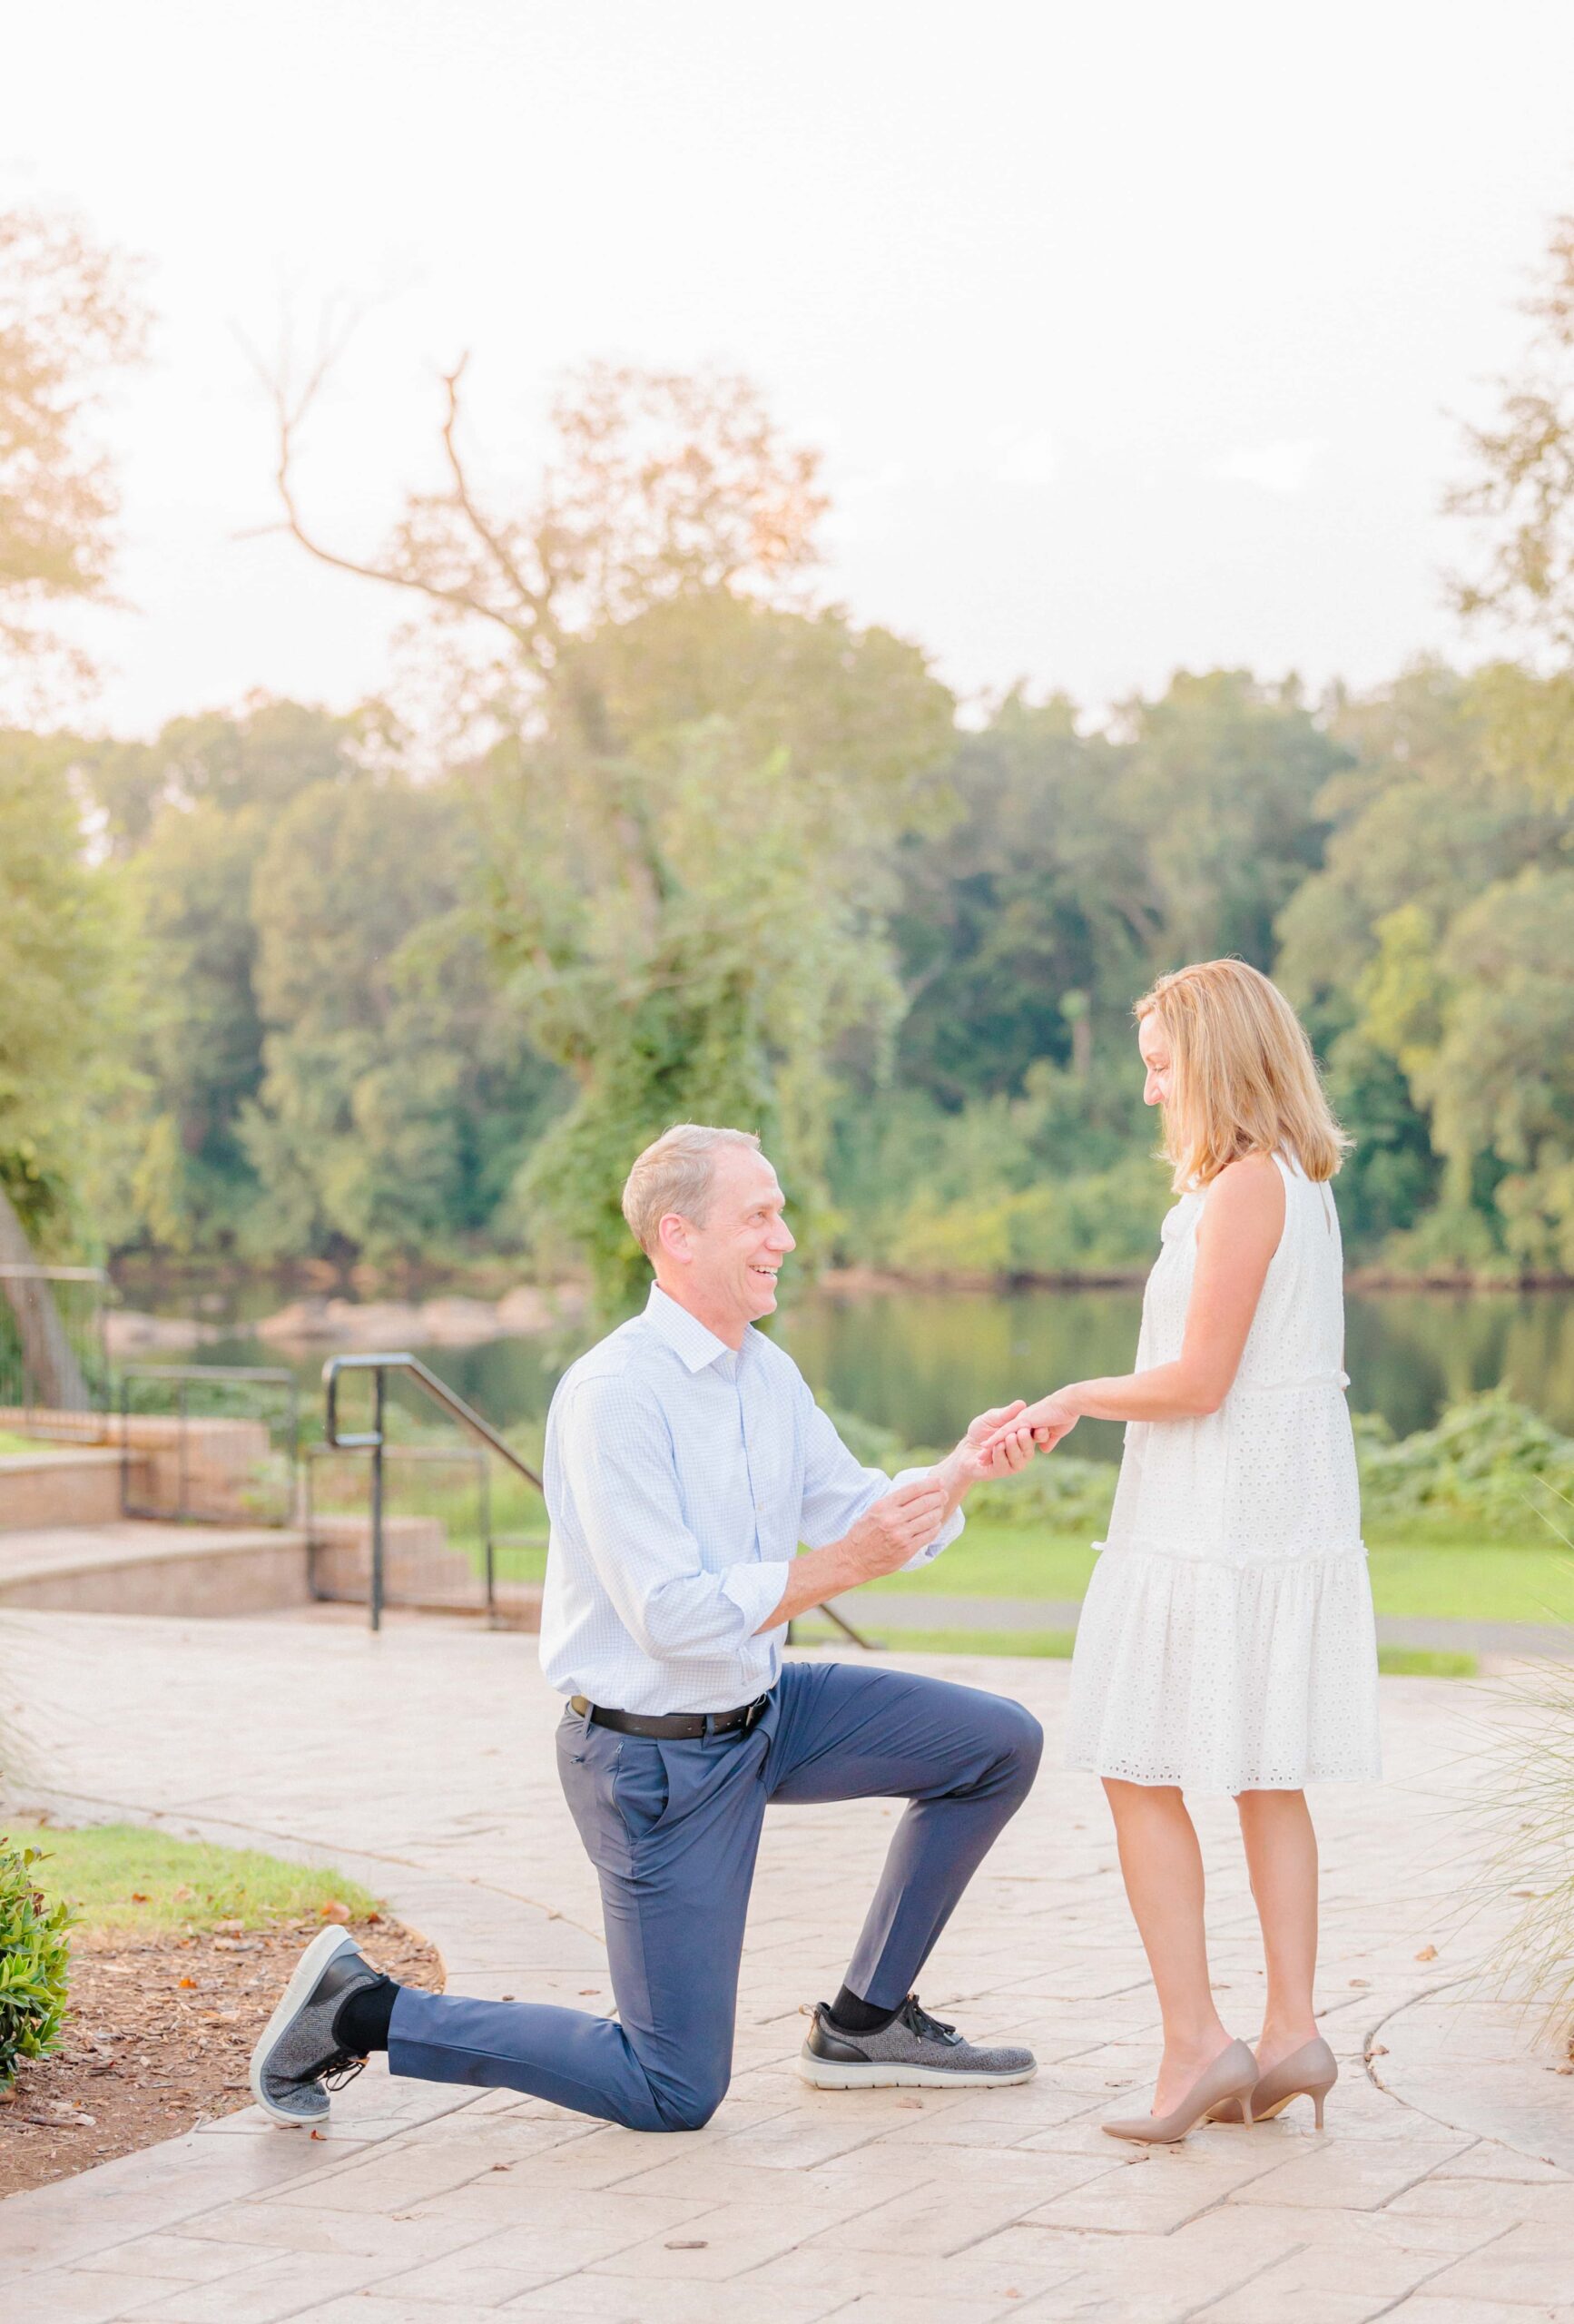 An image of Matt getting down on one knee to propose to Janet in front of the riverwalk in Rock Hill, SC.